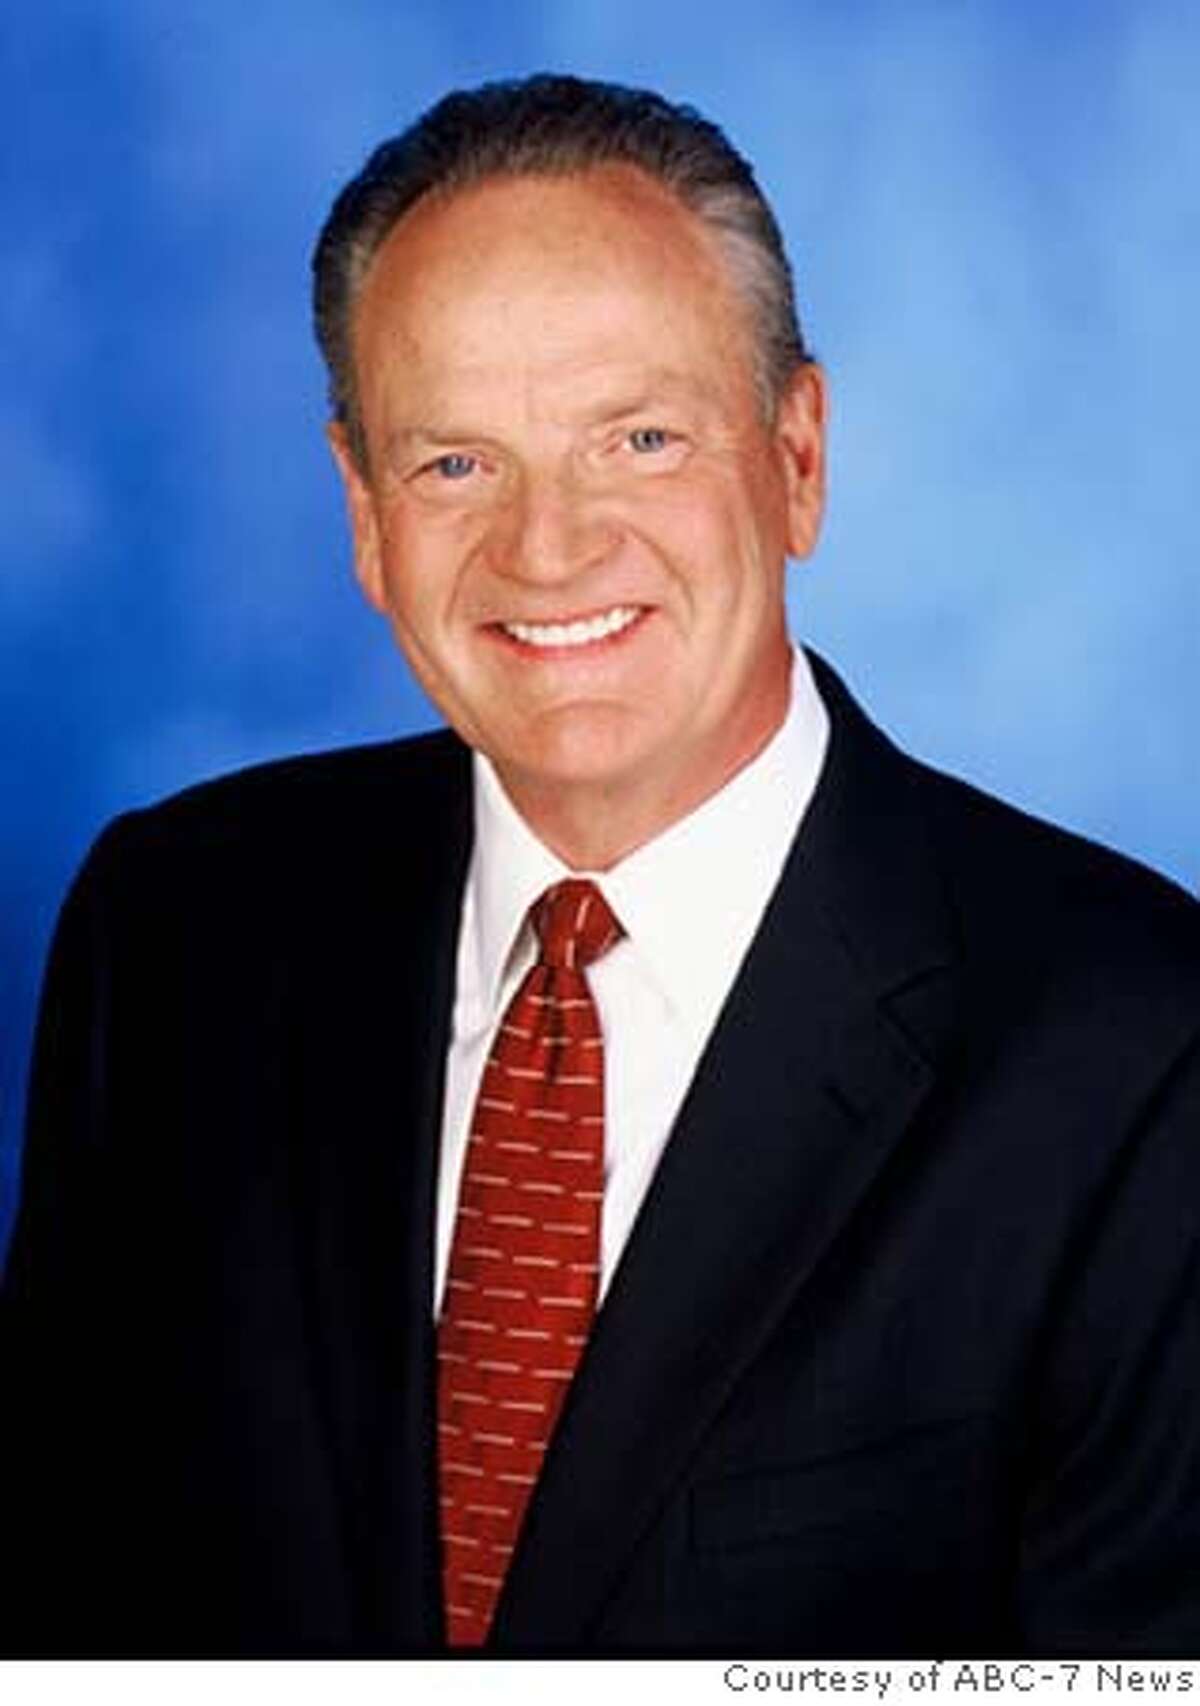 OBIT photo of ABC-7 (KGO) television and radio personality Pete Wilson, who died while undergoing hip replacement surgery Saturday, July 20, 2007 at Stanford Medical Center. Photo courtesy ABC 7 News